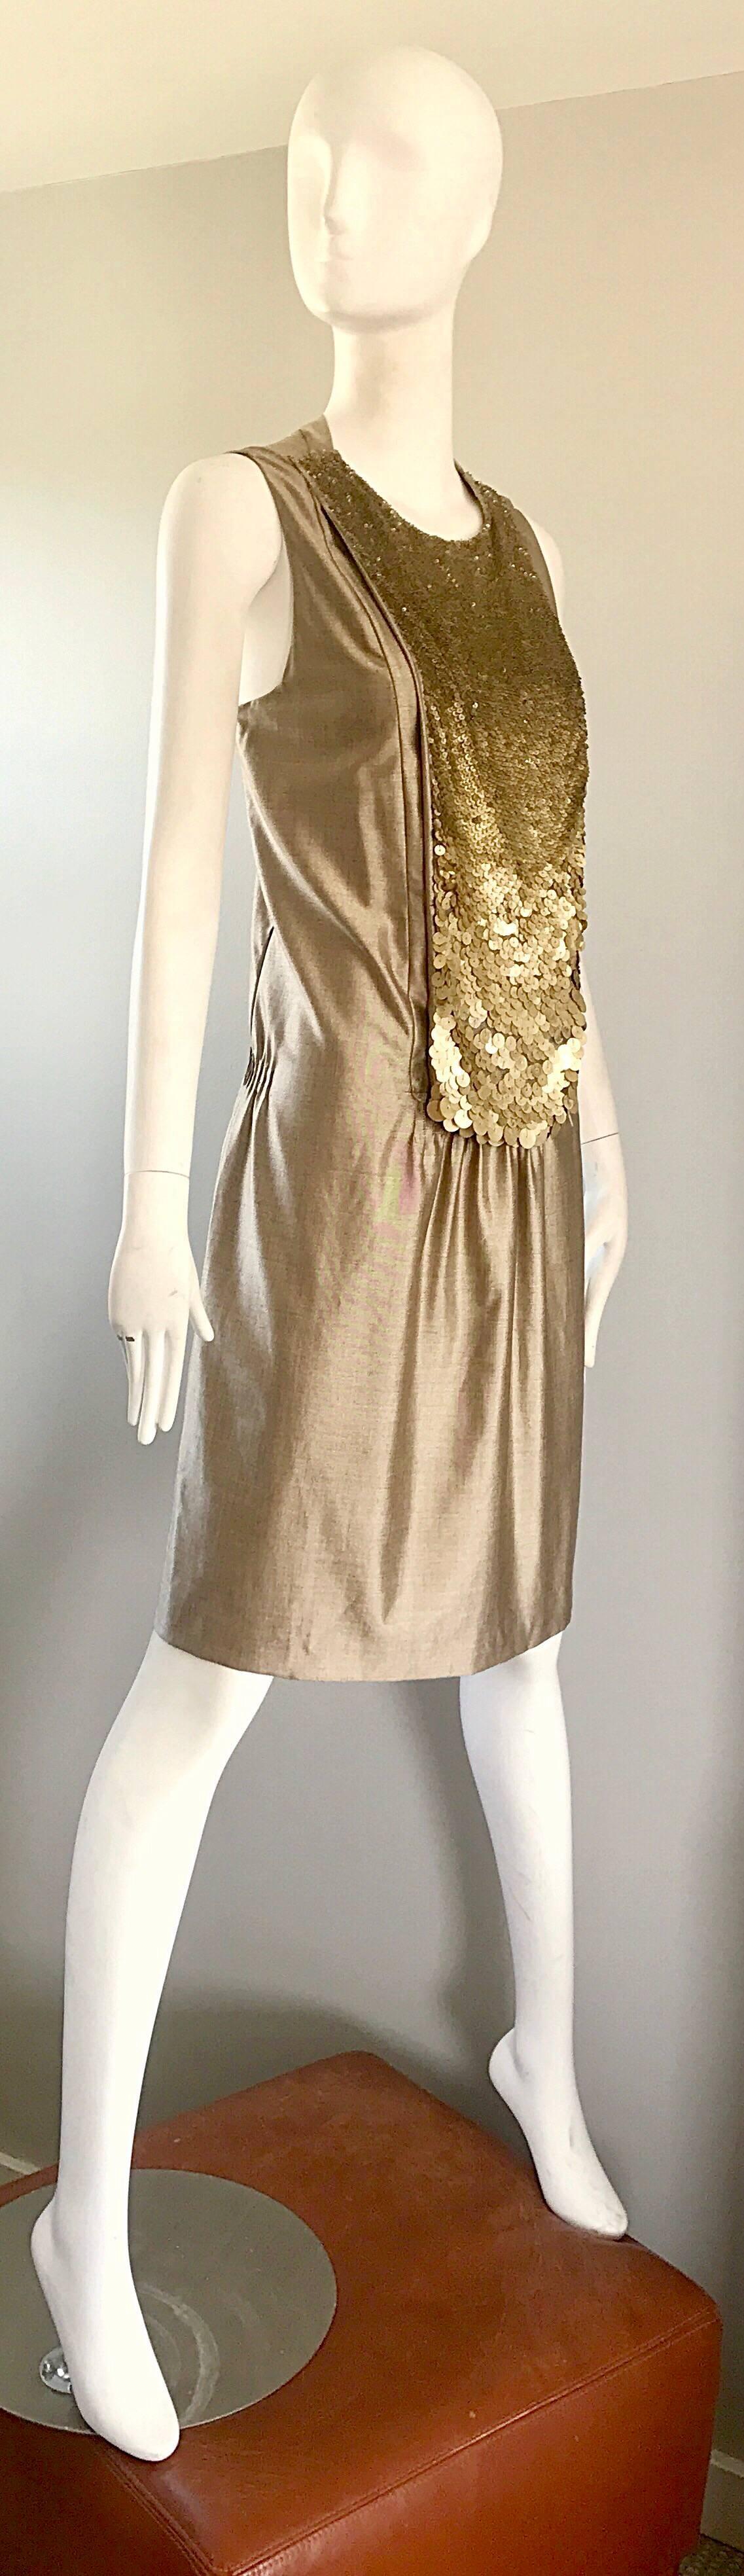 Luca Luca Size 42 / 12 Gold Metallic Silk Deco Style Sequin Bib 20s Style Dress In Excellent Condition For Sale In San Diego, CA